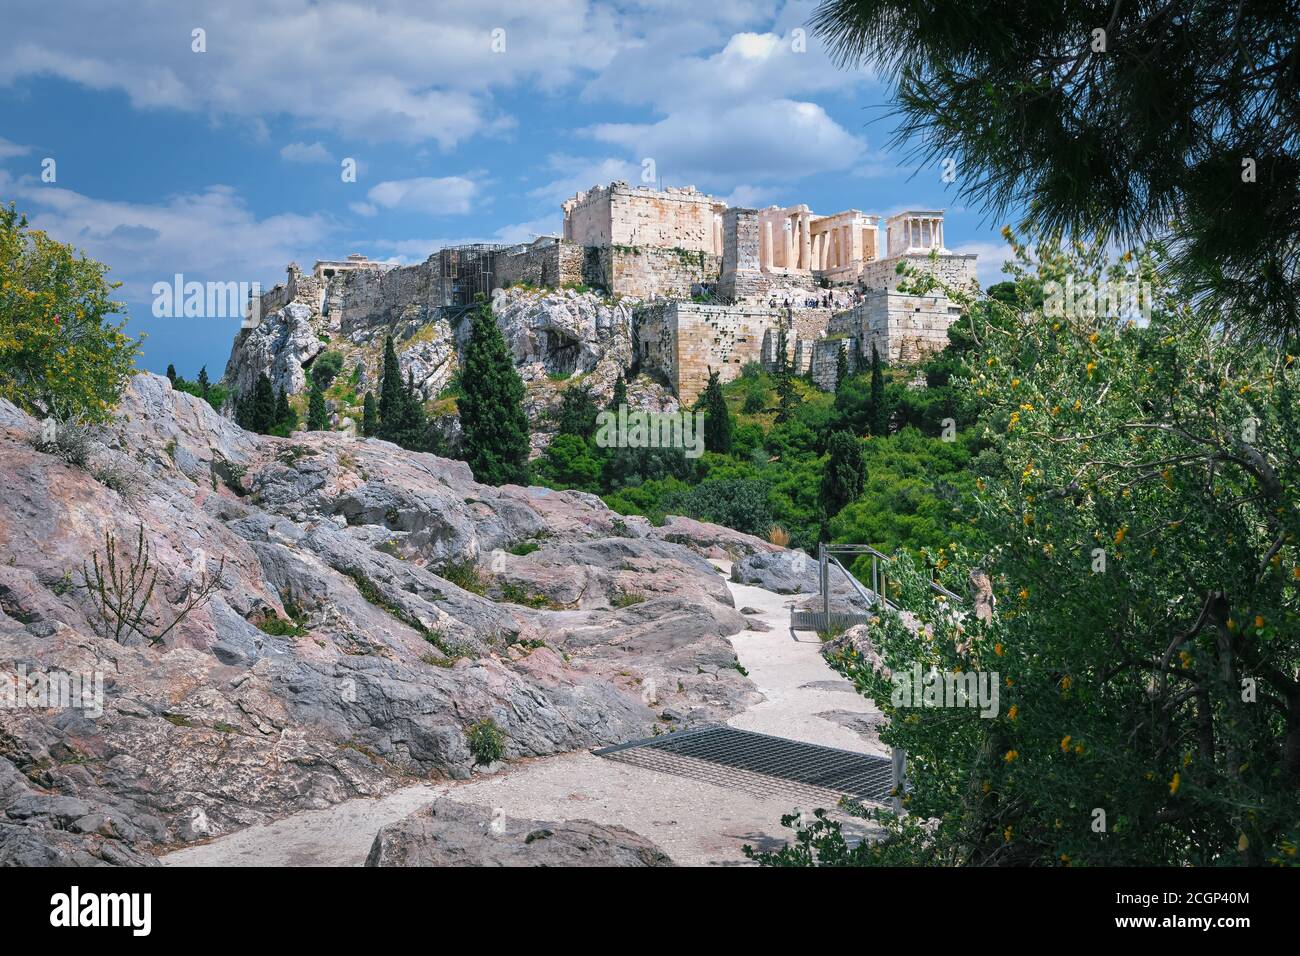 View of Acropolis hill from Areopagus hill on summer day with great clouds in blue sky, Athens, Greece. UNESCO world heritage. Propylaea, Parthenon. Stock Photo